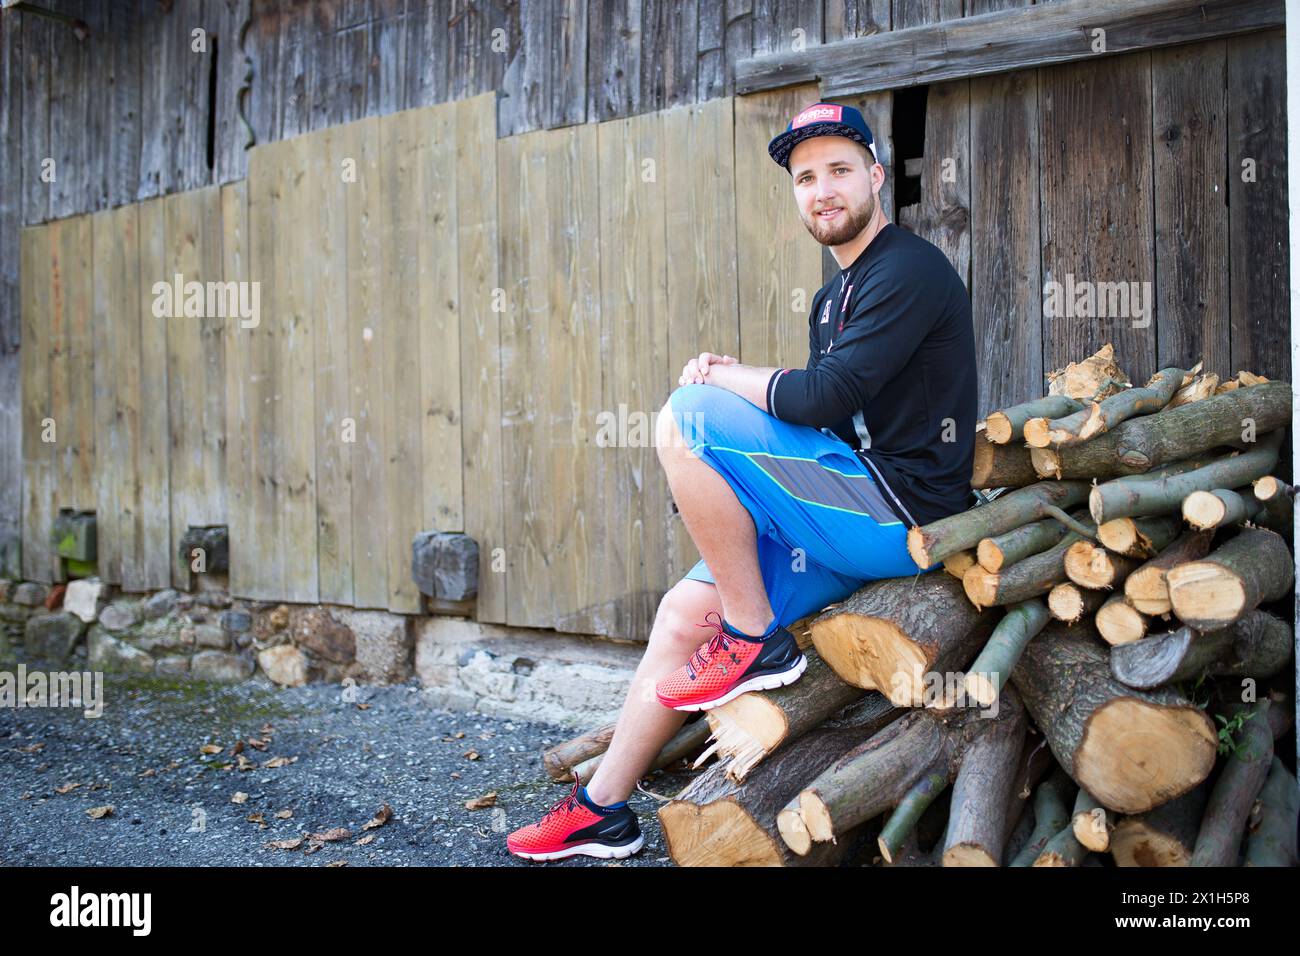 Austrian skier Marco Schwarz poses during a photo shoot at home in Radenthein, Austria, on 13 th September 2016. PICTURE: Marco Schwarz - 20160913 PD11989 - Rechteinfo: Rights Managed (RM) Stock Photo